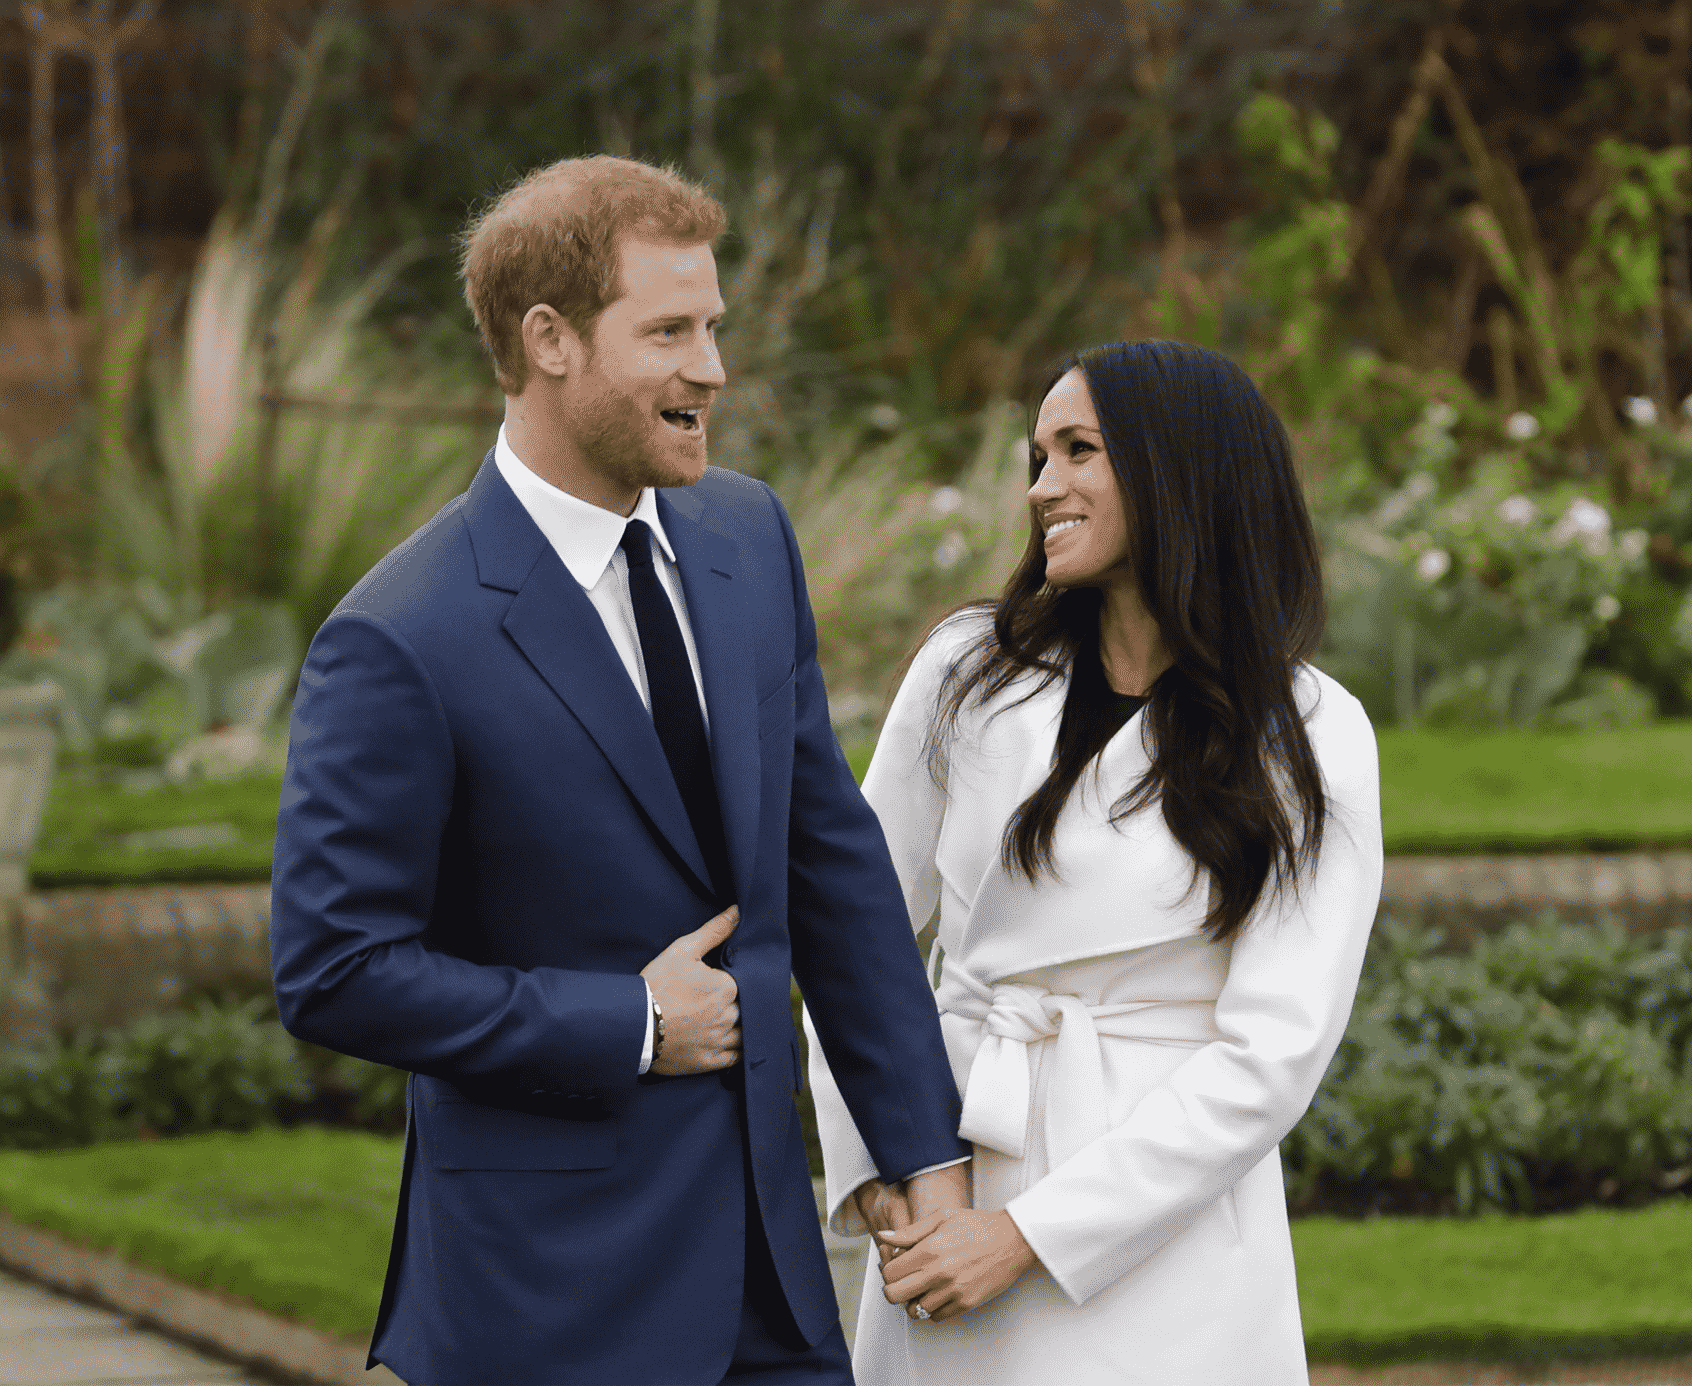 Blind date to blinding love for Harry and Meghan